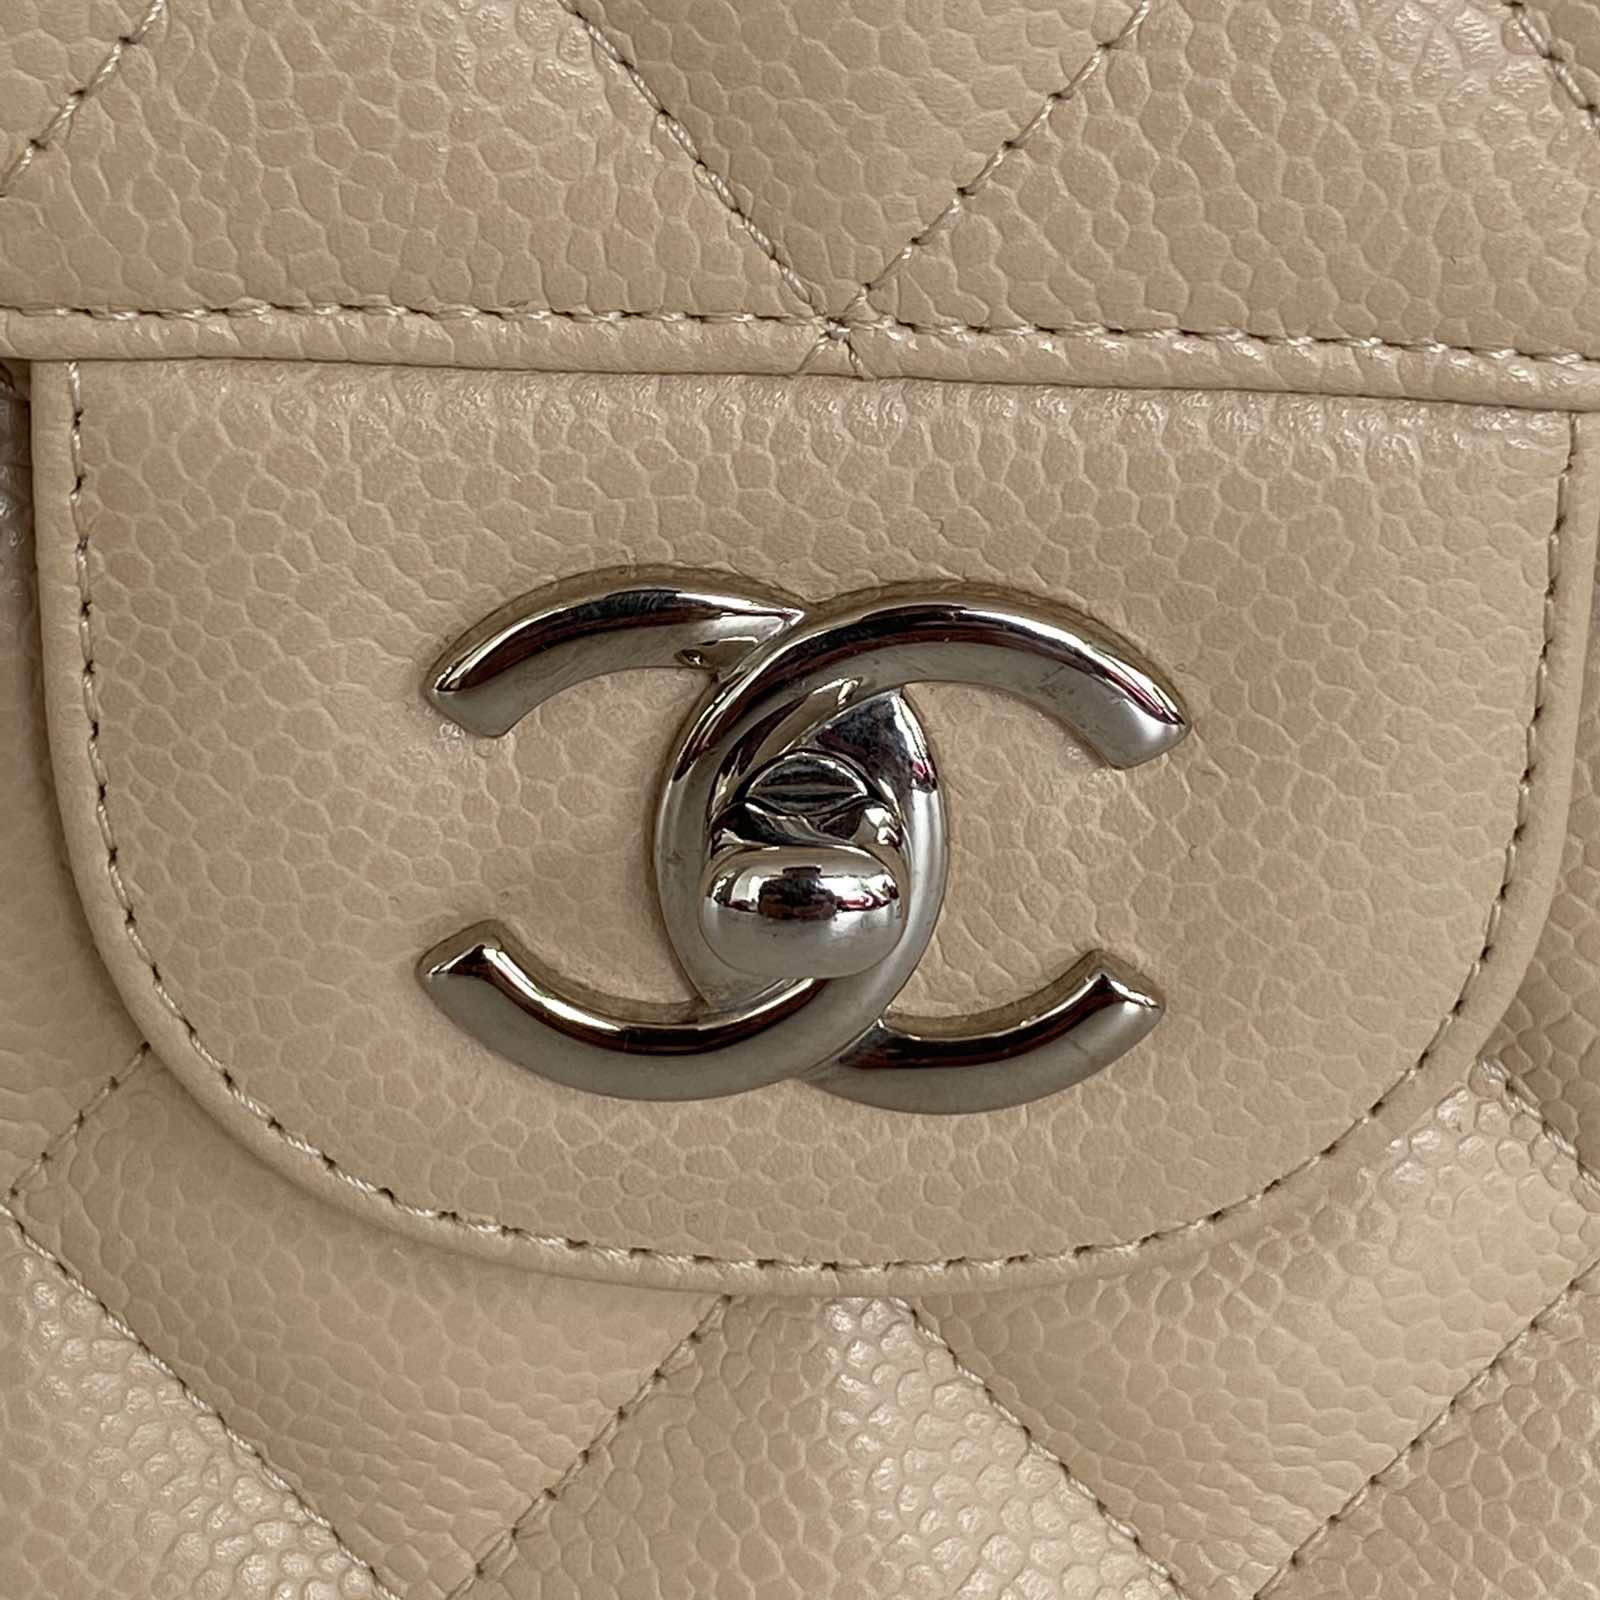 Chanel Jumbo Classic Flap (Caviar Leather with Silver Hardware) – Handbag  Review – Alice's World